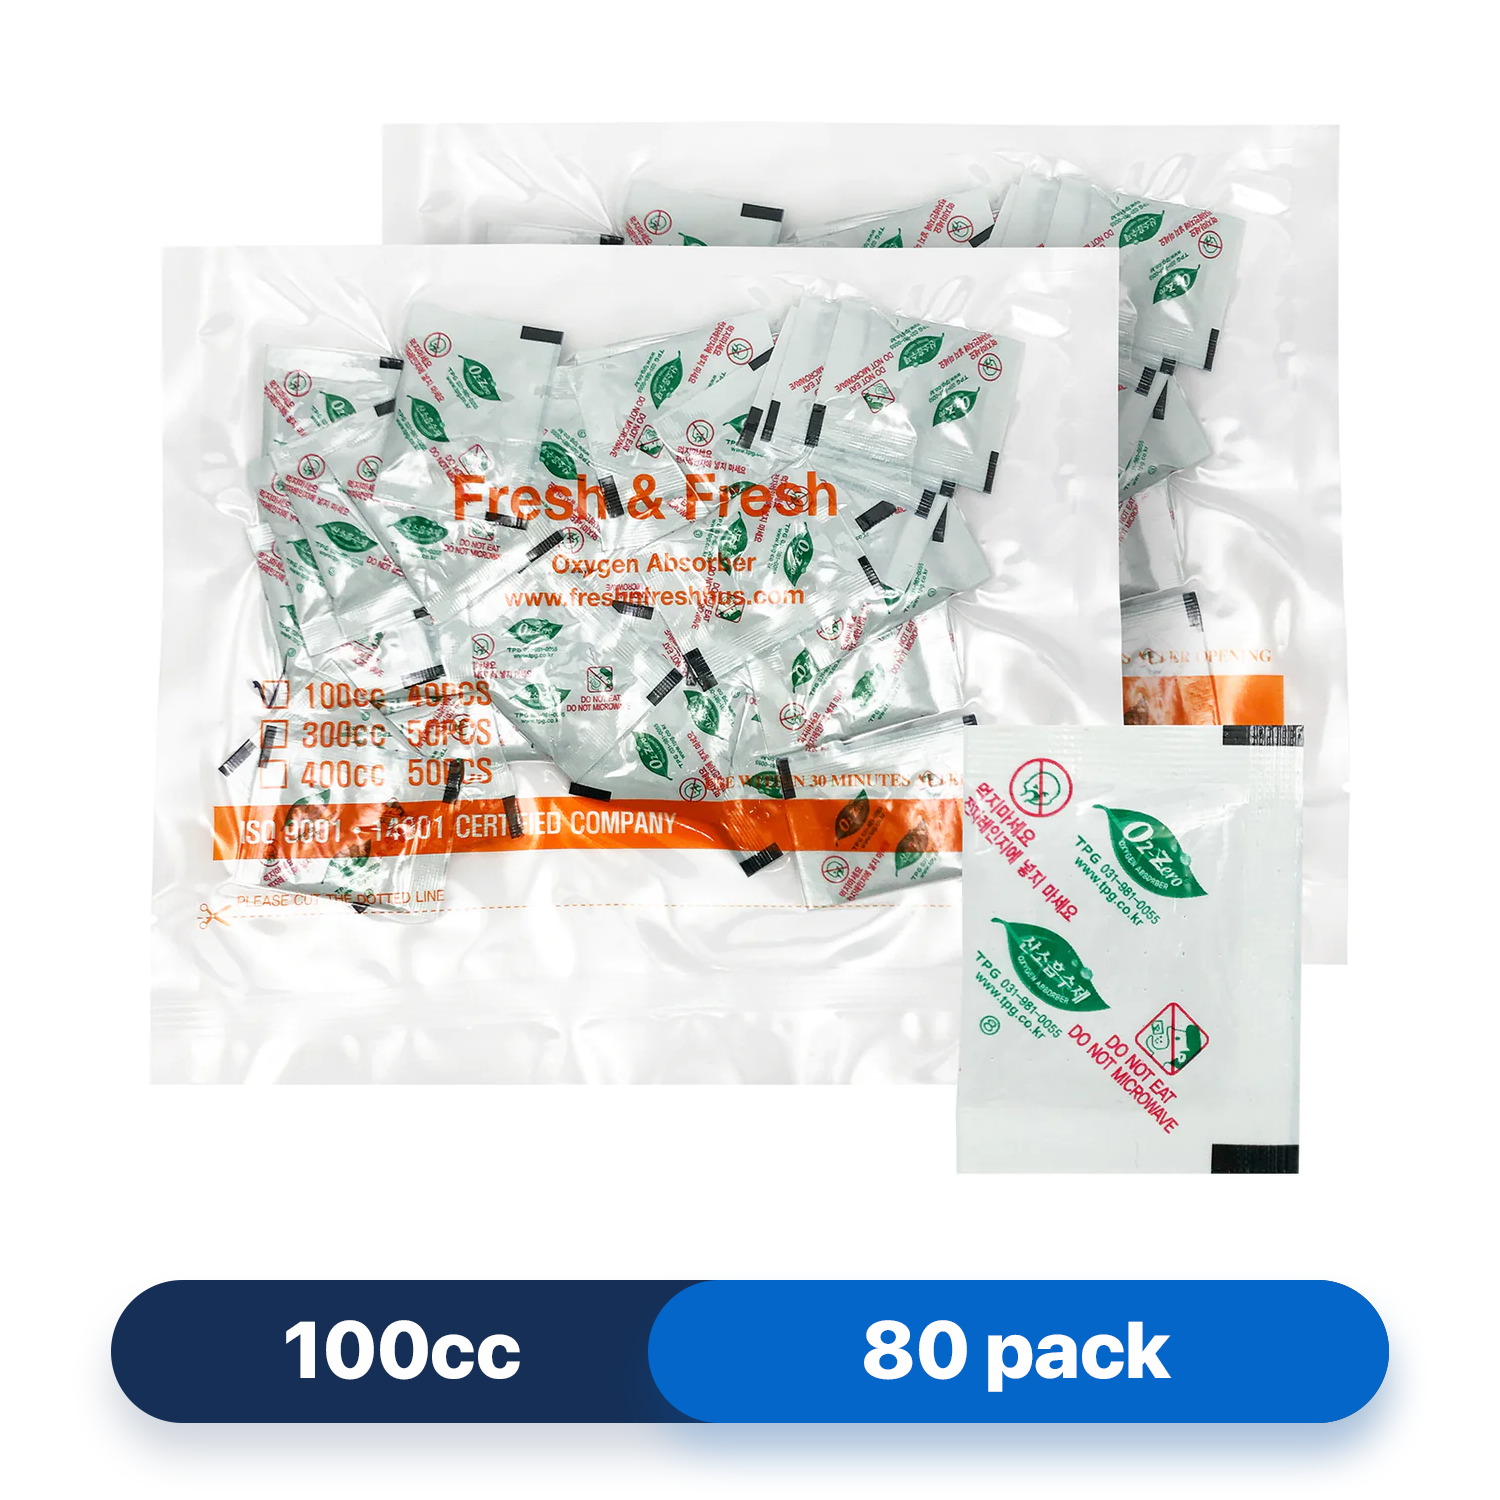 Fresh & Fresh 100 CC (80 Packets) Premium Oxygen Absorbers for Food Storage, Oxygen Scavengers Packets(2 Bag of 40 Packets) - ISO 9001 Certified Facility(FDA Compliant Packet Materials)